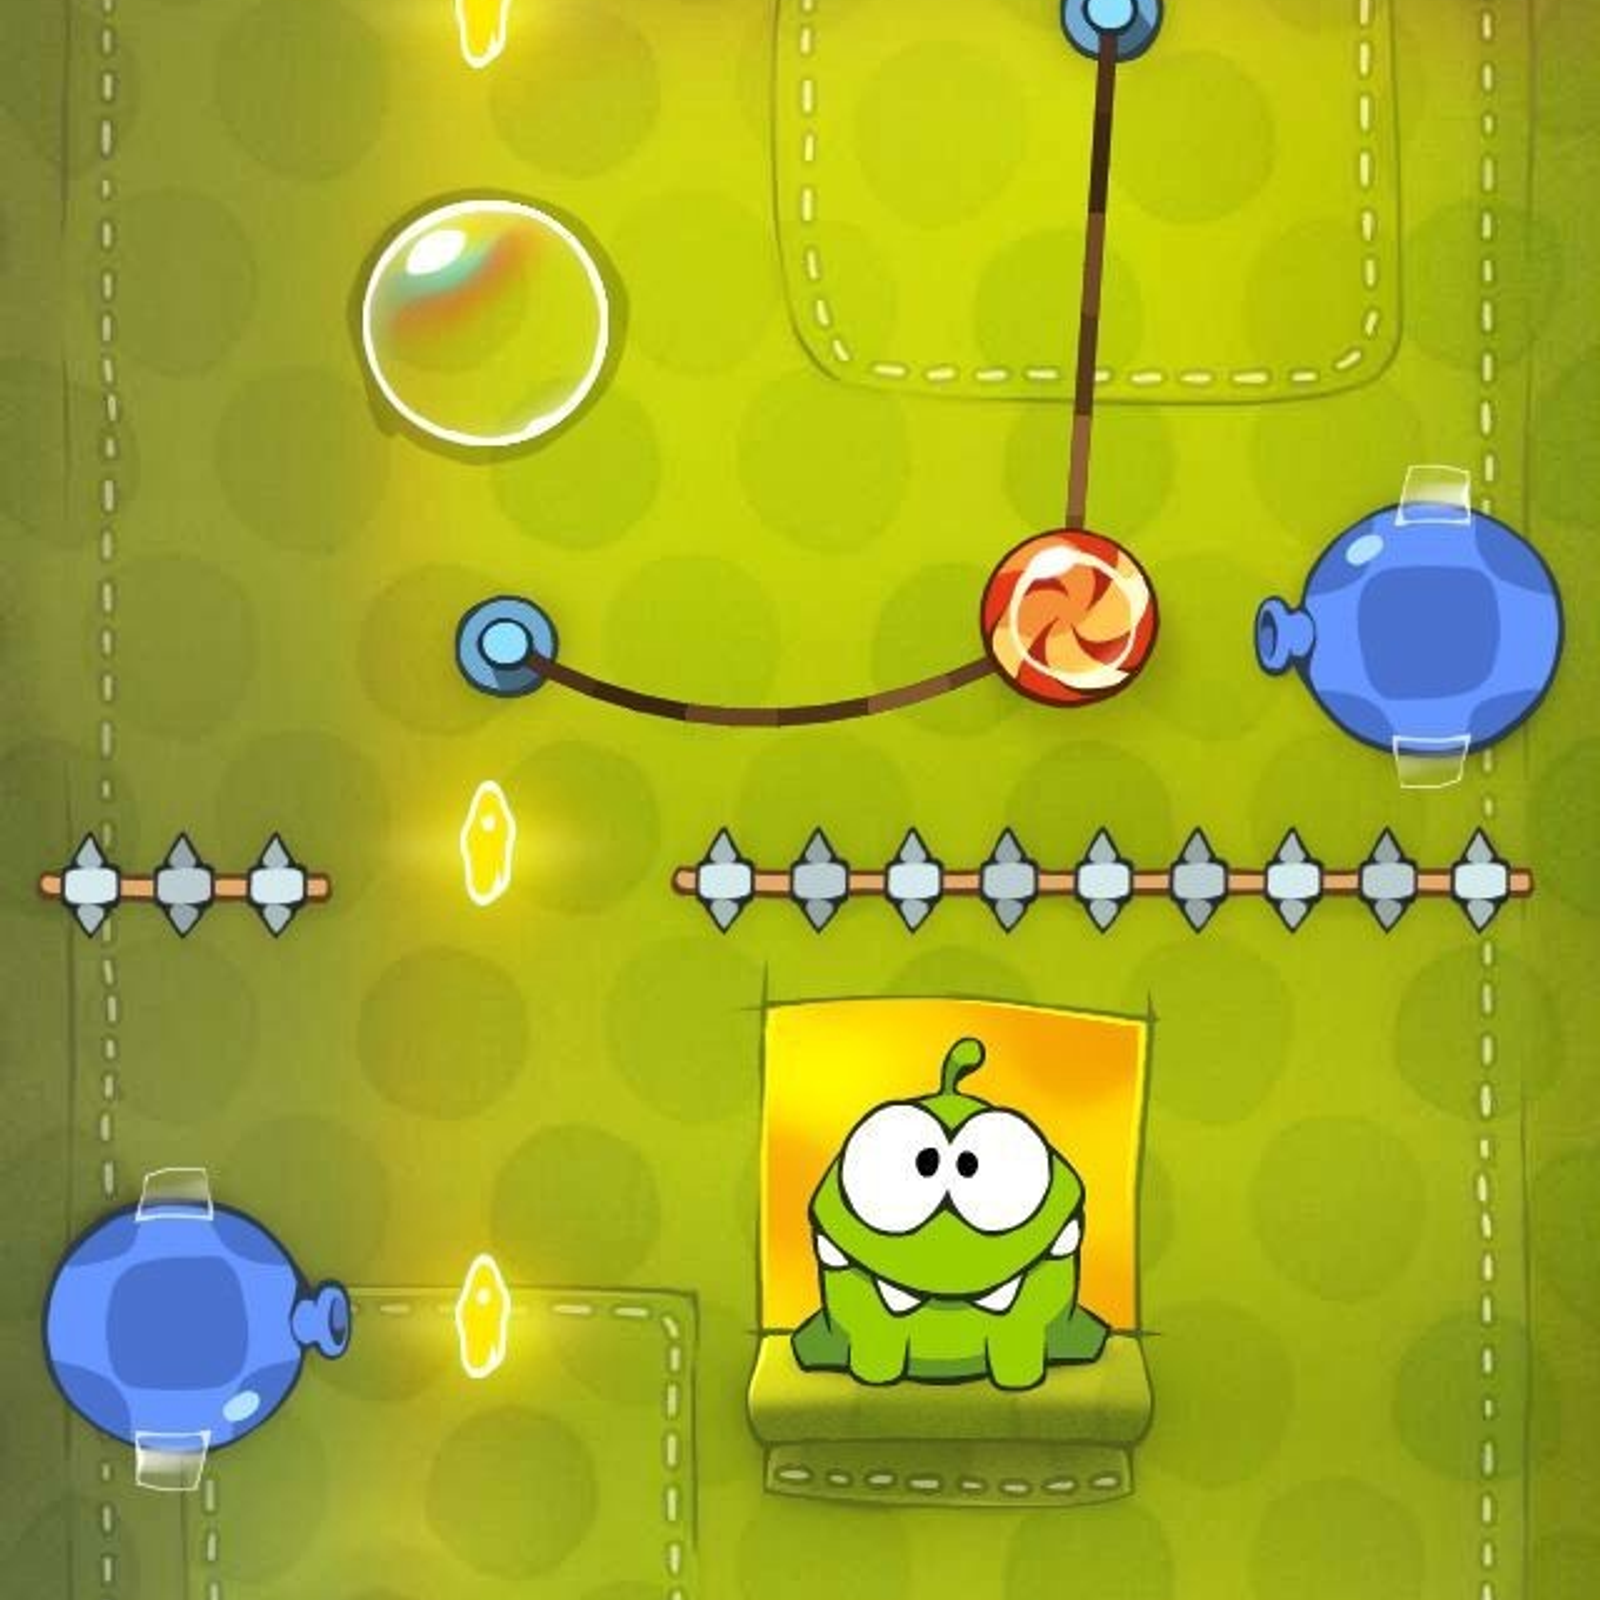 Cut the rope gold. Cut the Rope игра. Игры типа Cut the Rope. Лягушка из игры Cut the Rope. Cut the Rope обложка.